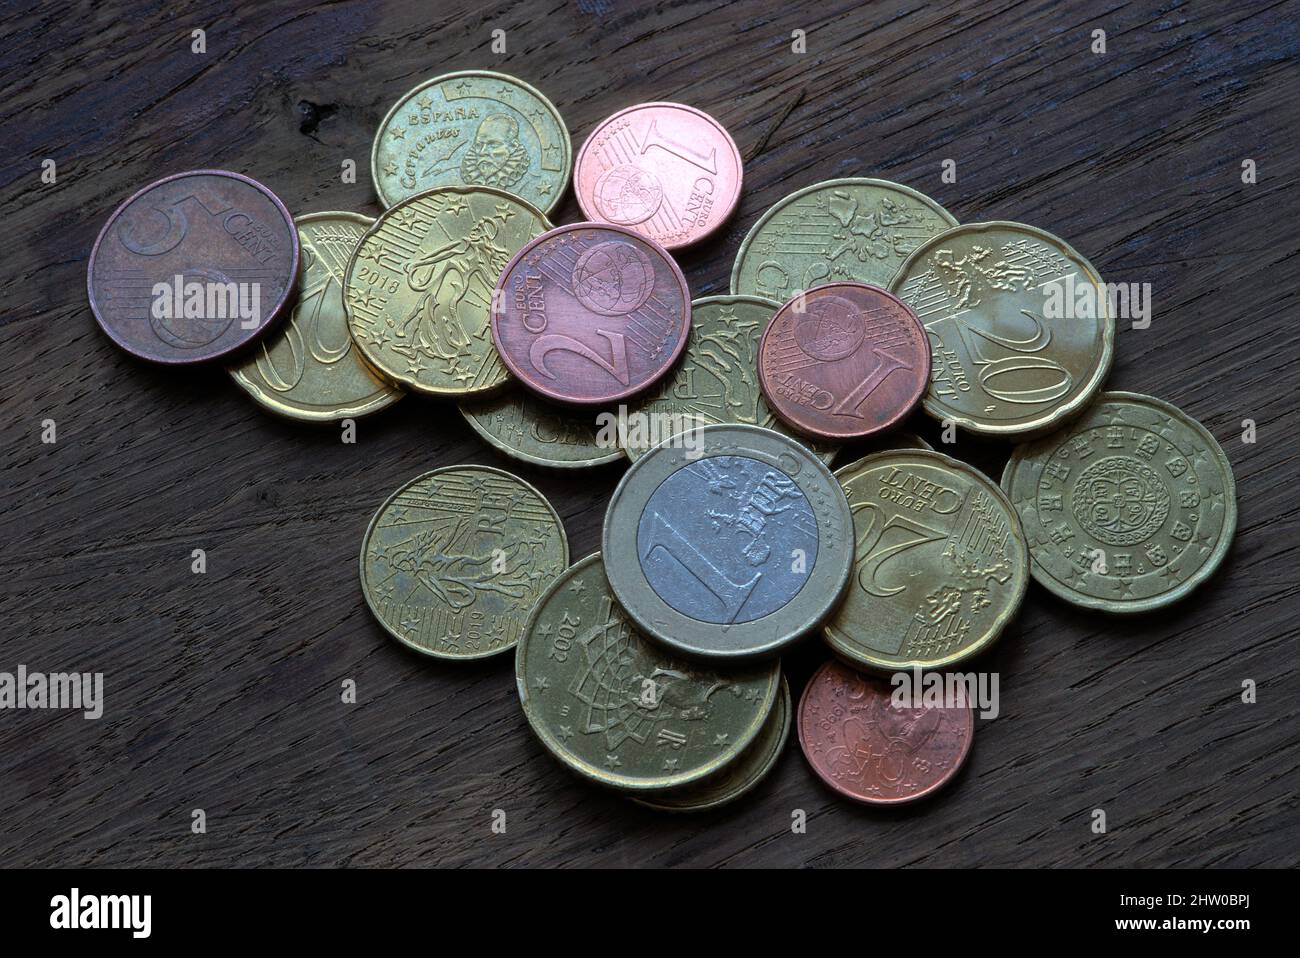 small coppered euro cent coins Stock Photo